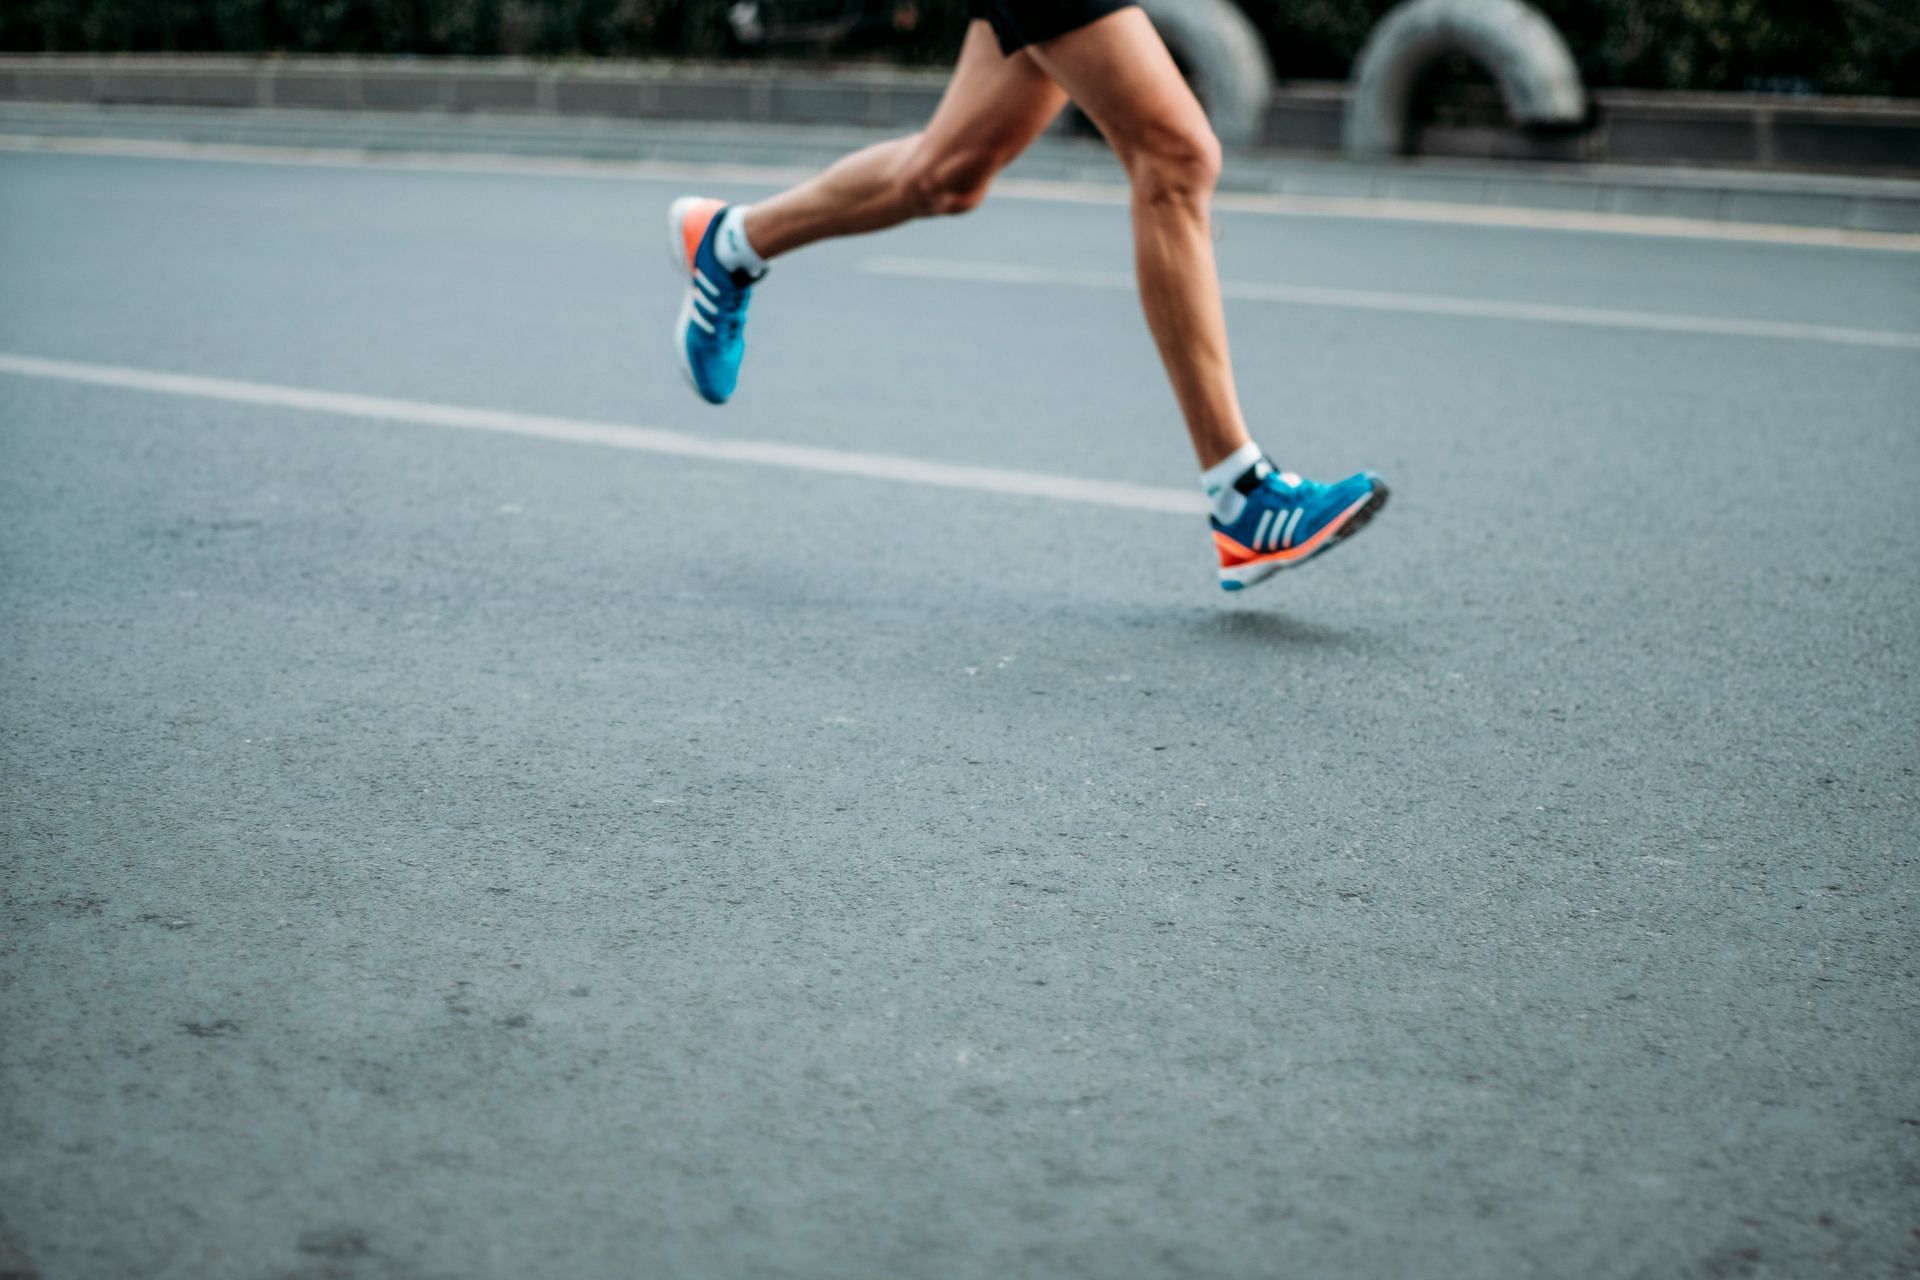 Burning 1000 calories a day by just running (Image by sporlab/Unsplash)